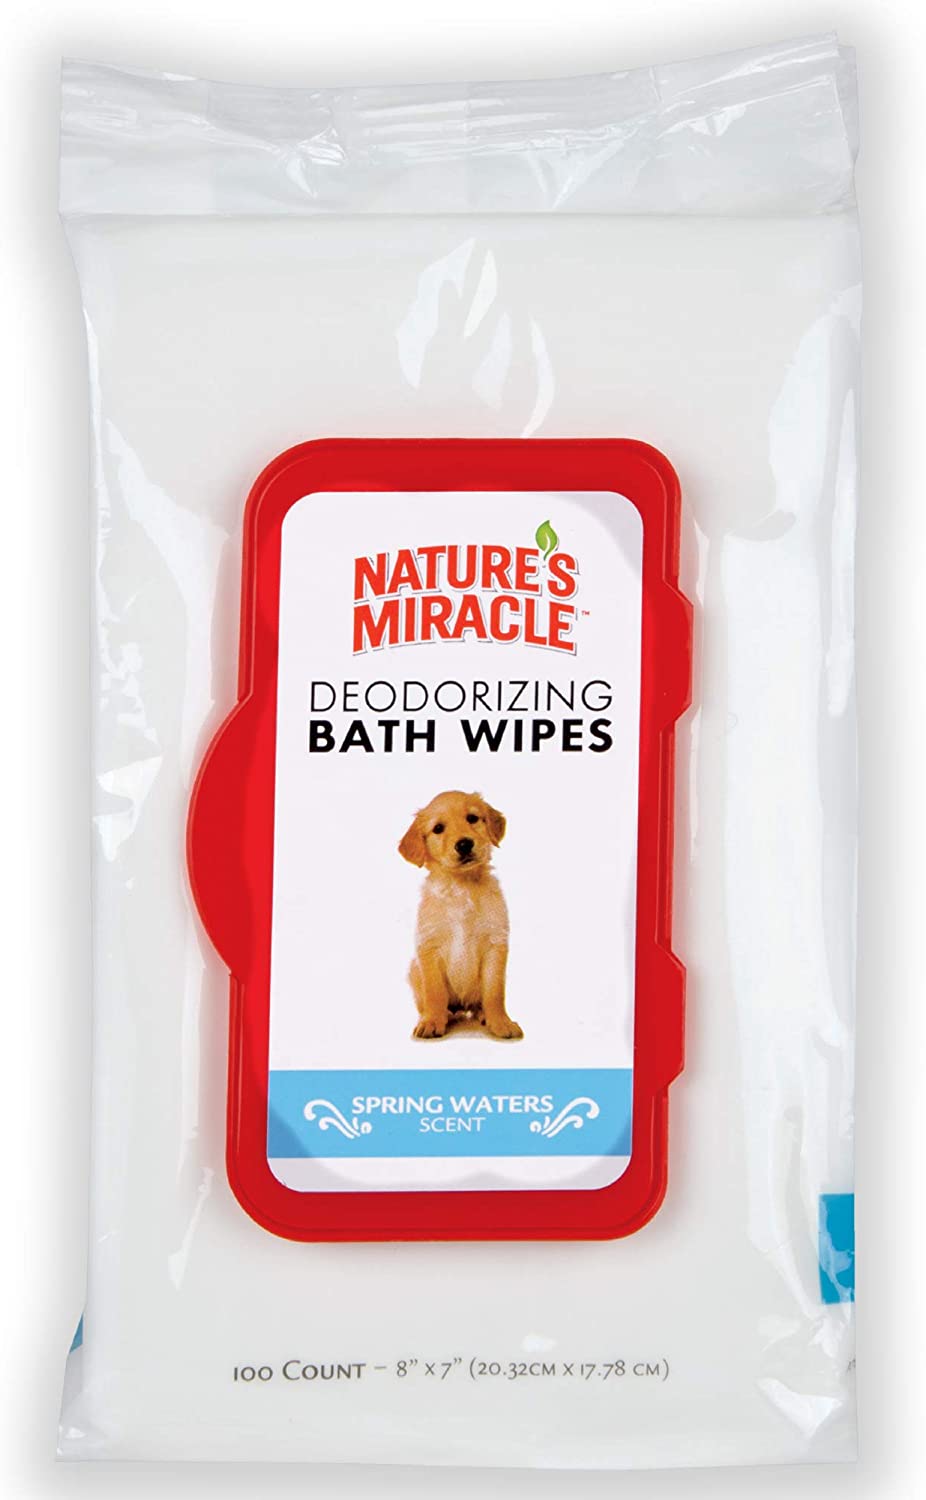 Nature’s Miracle Deodorizing Bath Wipes for Dogs $4.07 (REG $11.99)